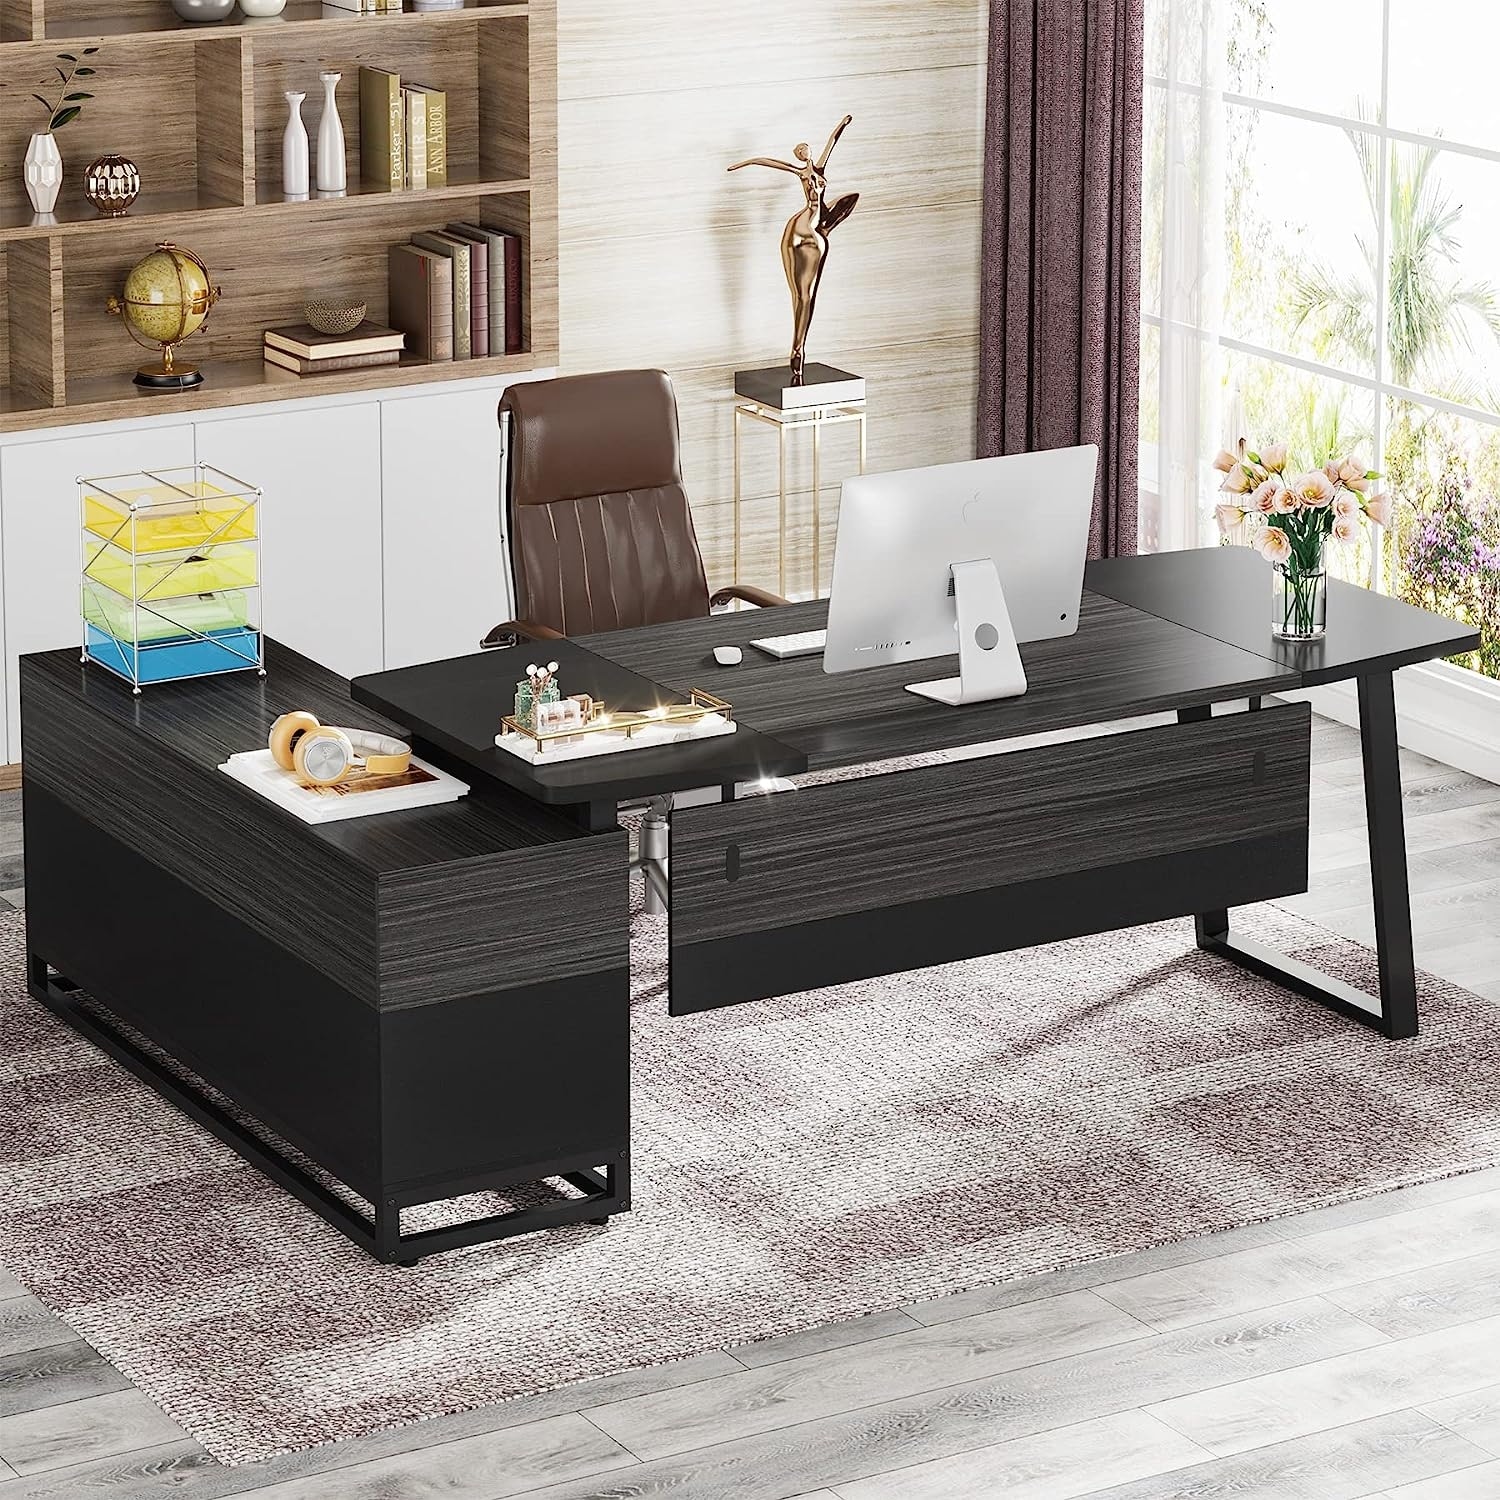 https://ak1.ostkcdn.com/images/products/is/images/direct/6dcd212b323219376a251c14d6d642ee1e9d4724/67%22-L-Shaped-Executive-Desk-with-55%22-File-Cabinet-for-Home-Office.jpg